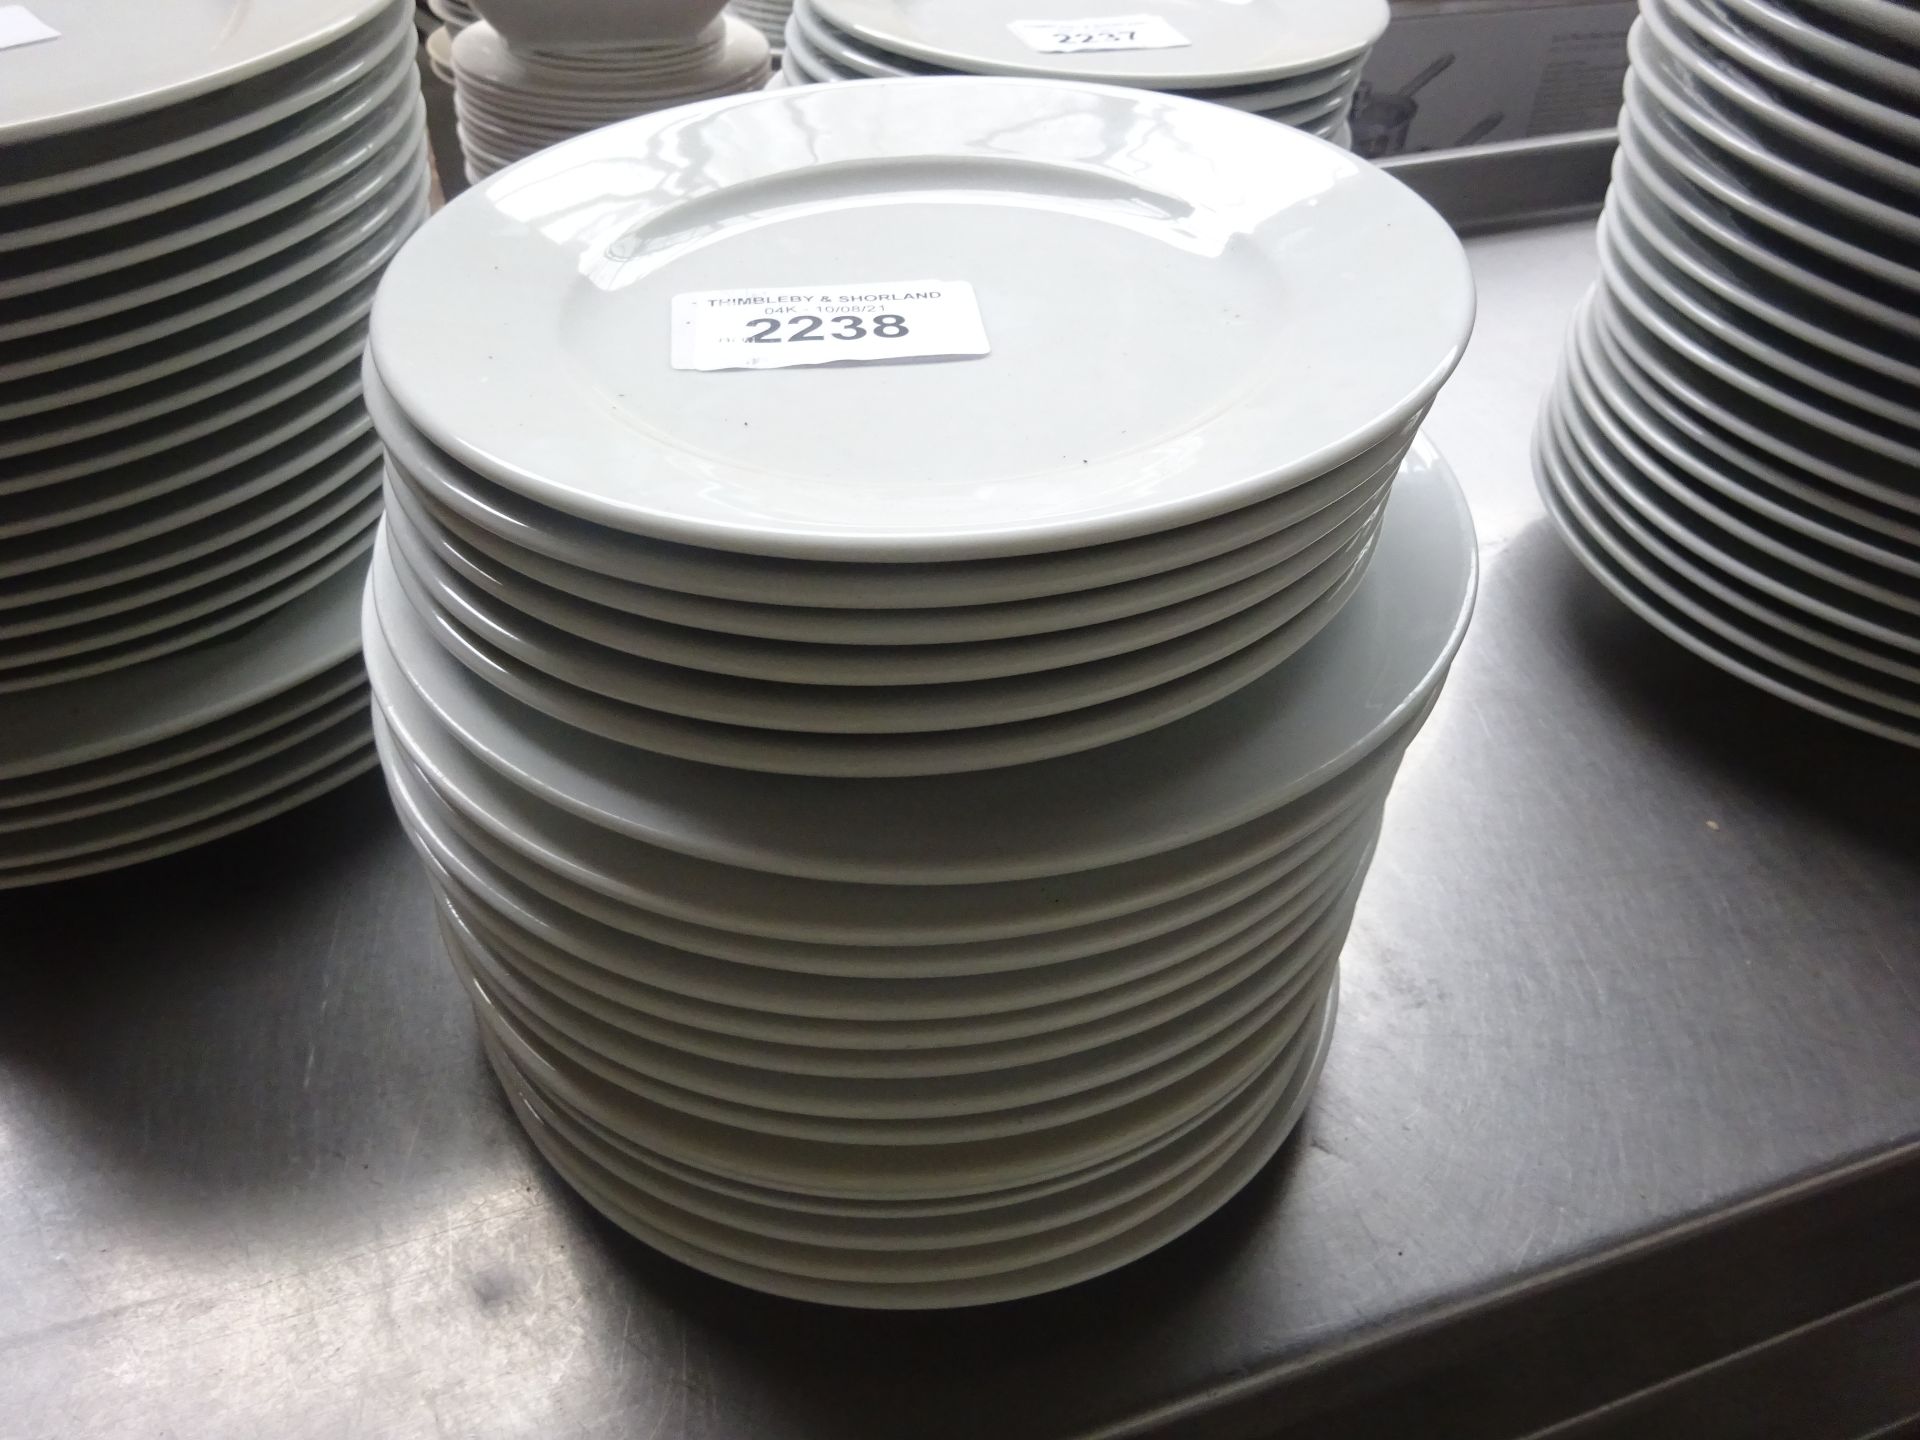 20 plates of various sizes